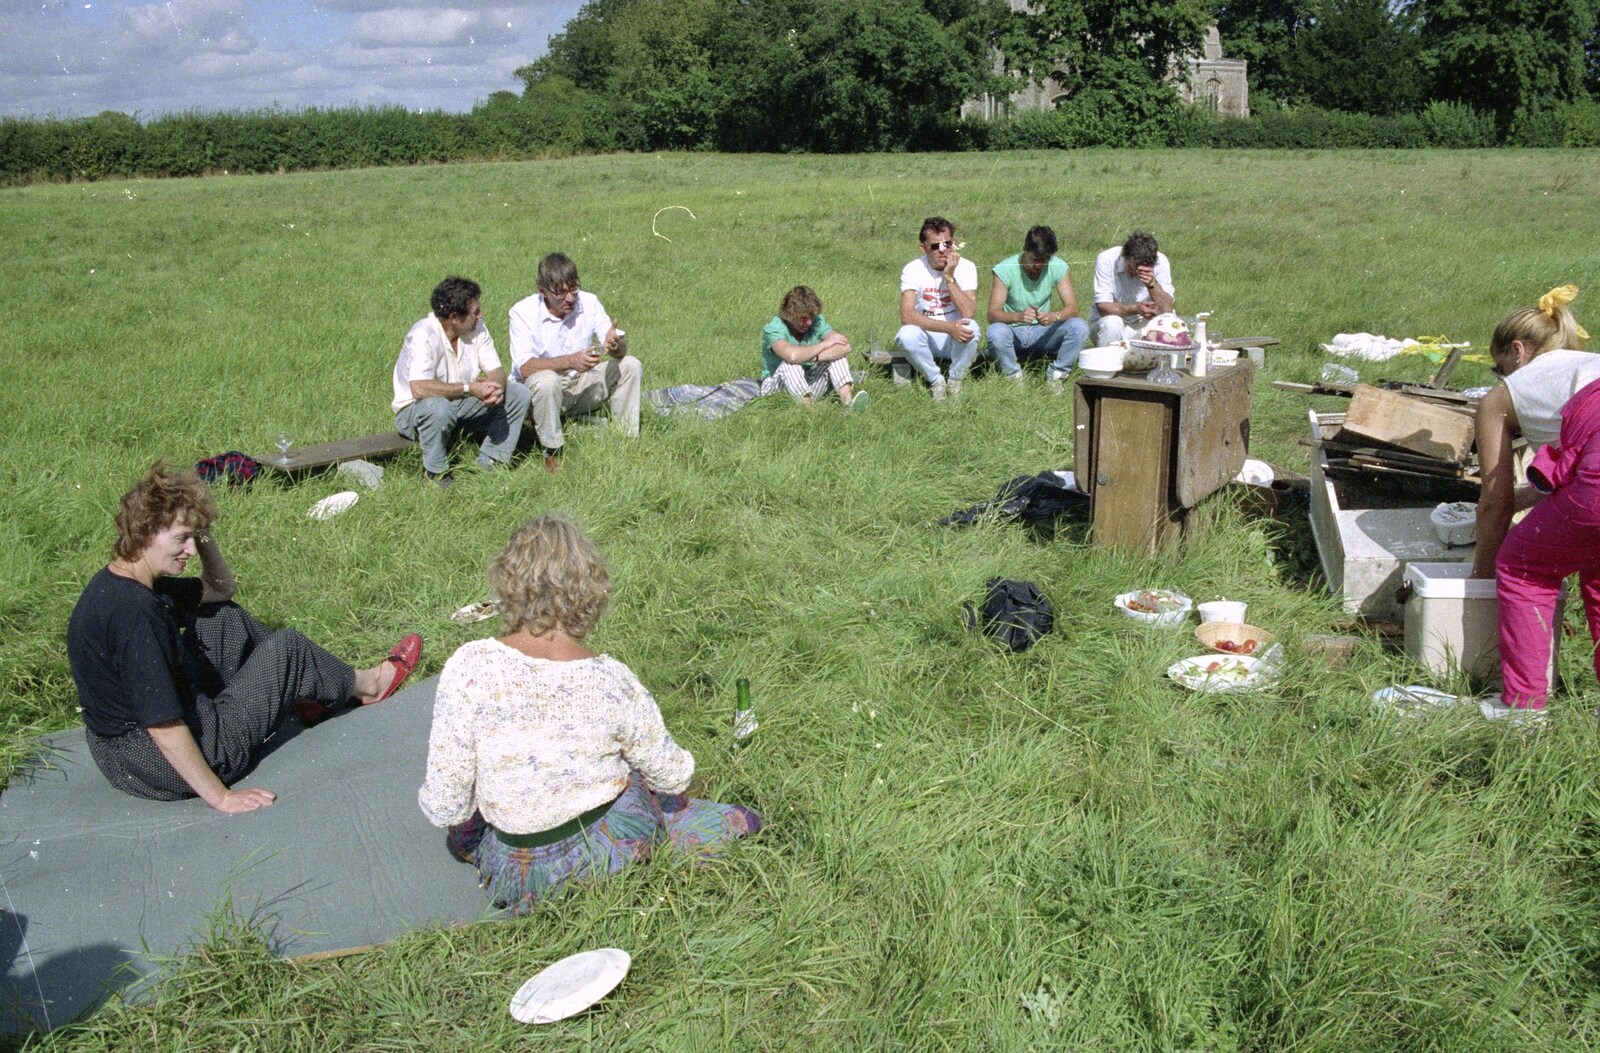 A barbeque in a field from Kite Flying, and an Introduction to BPCC Printec, Diss, Norfolk - 3rd August 1989